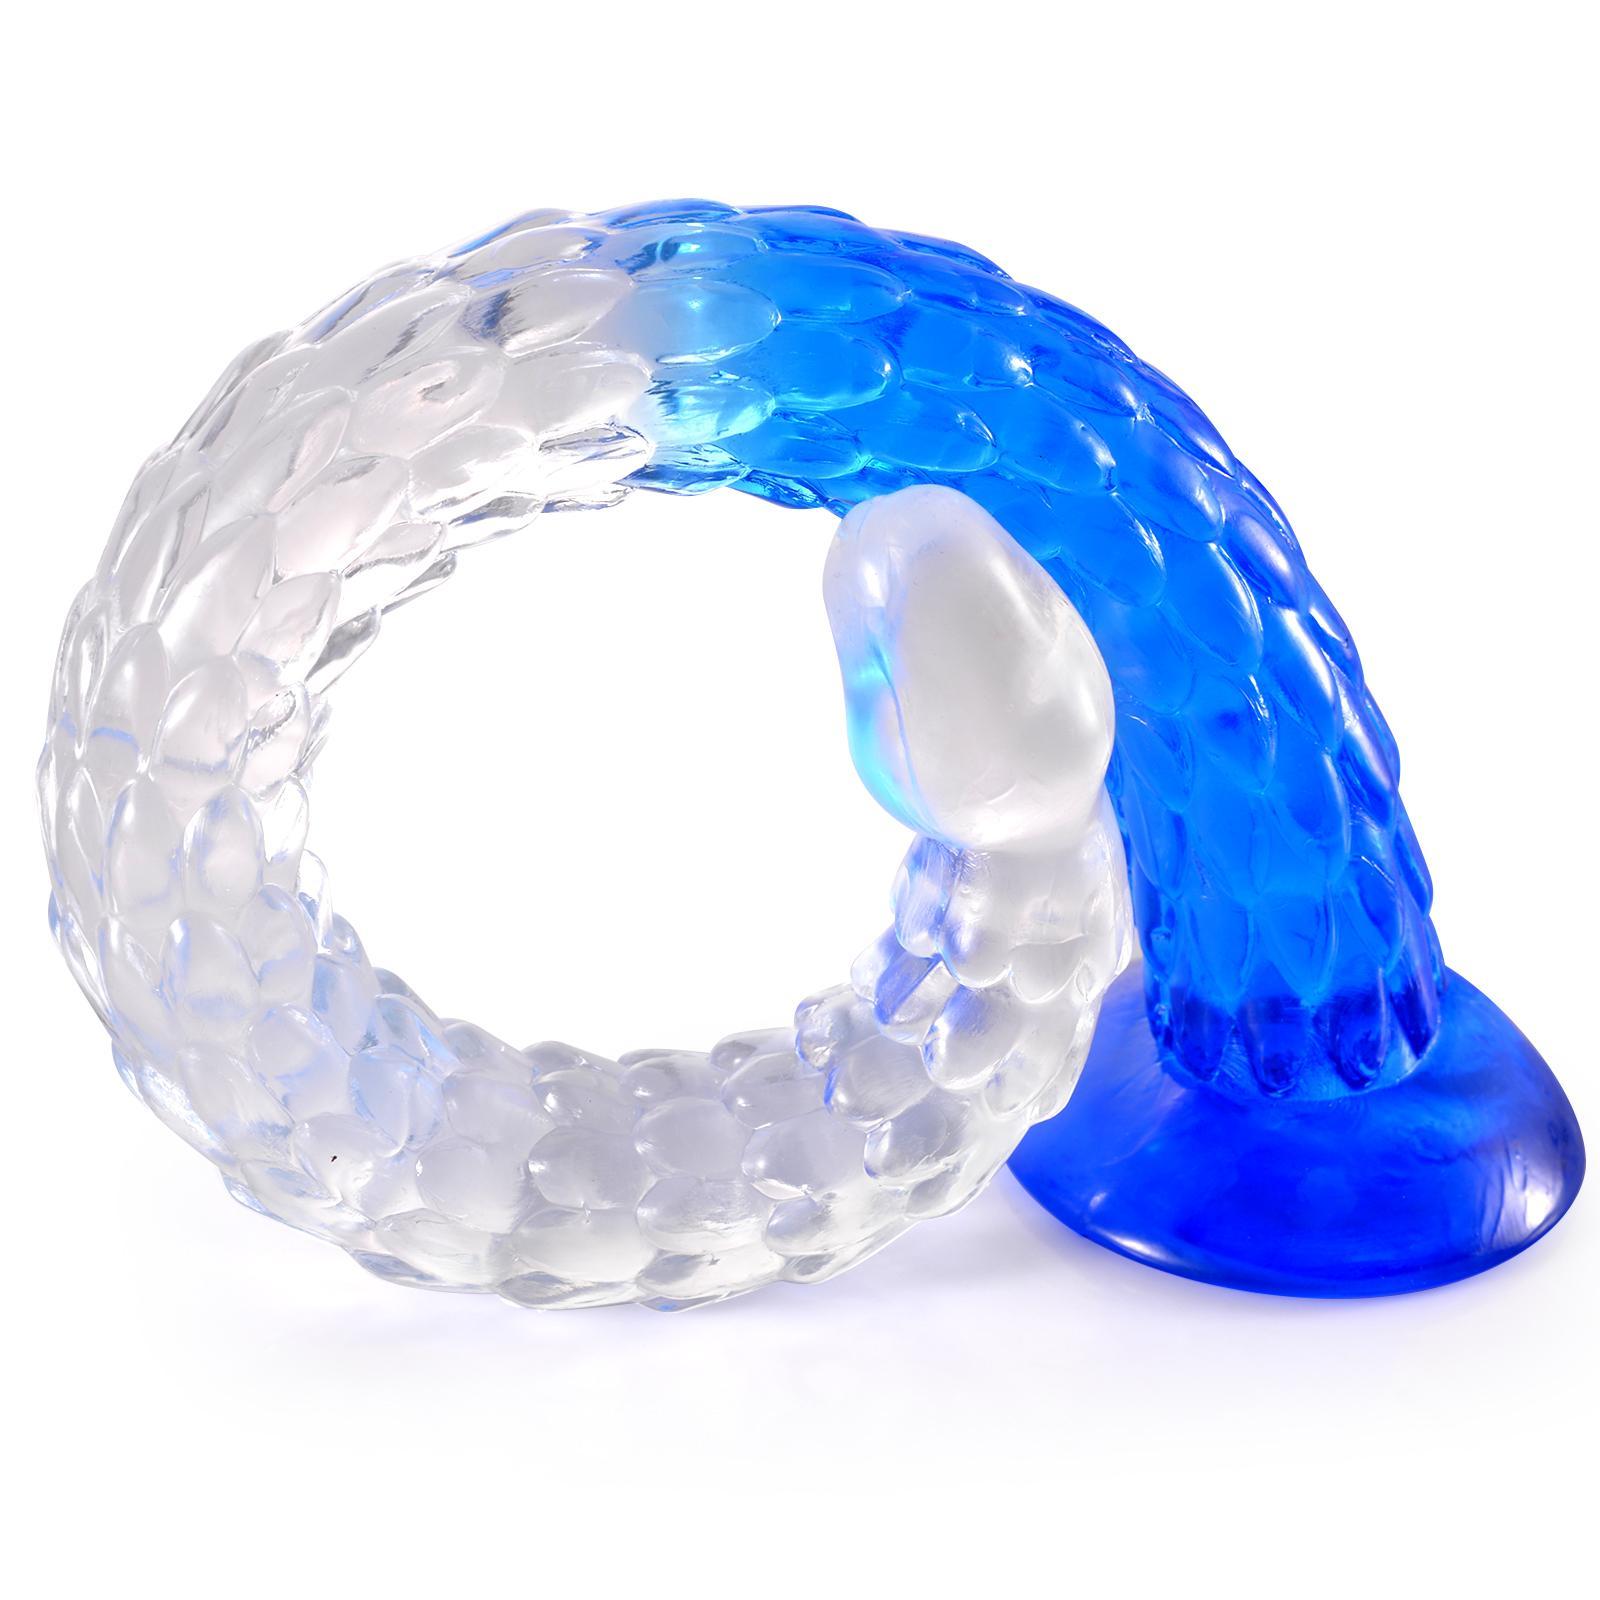 16-23inch Clear+blue Super Long Dragonscale Anal Dildo Particles Strong Friction Butt Plug Sex Toy For Women Men Lesbian Couple